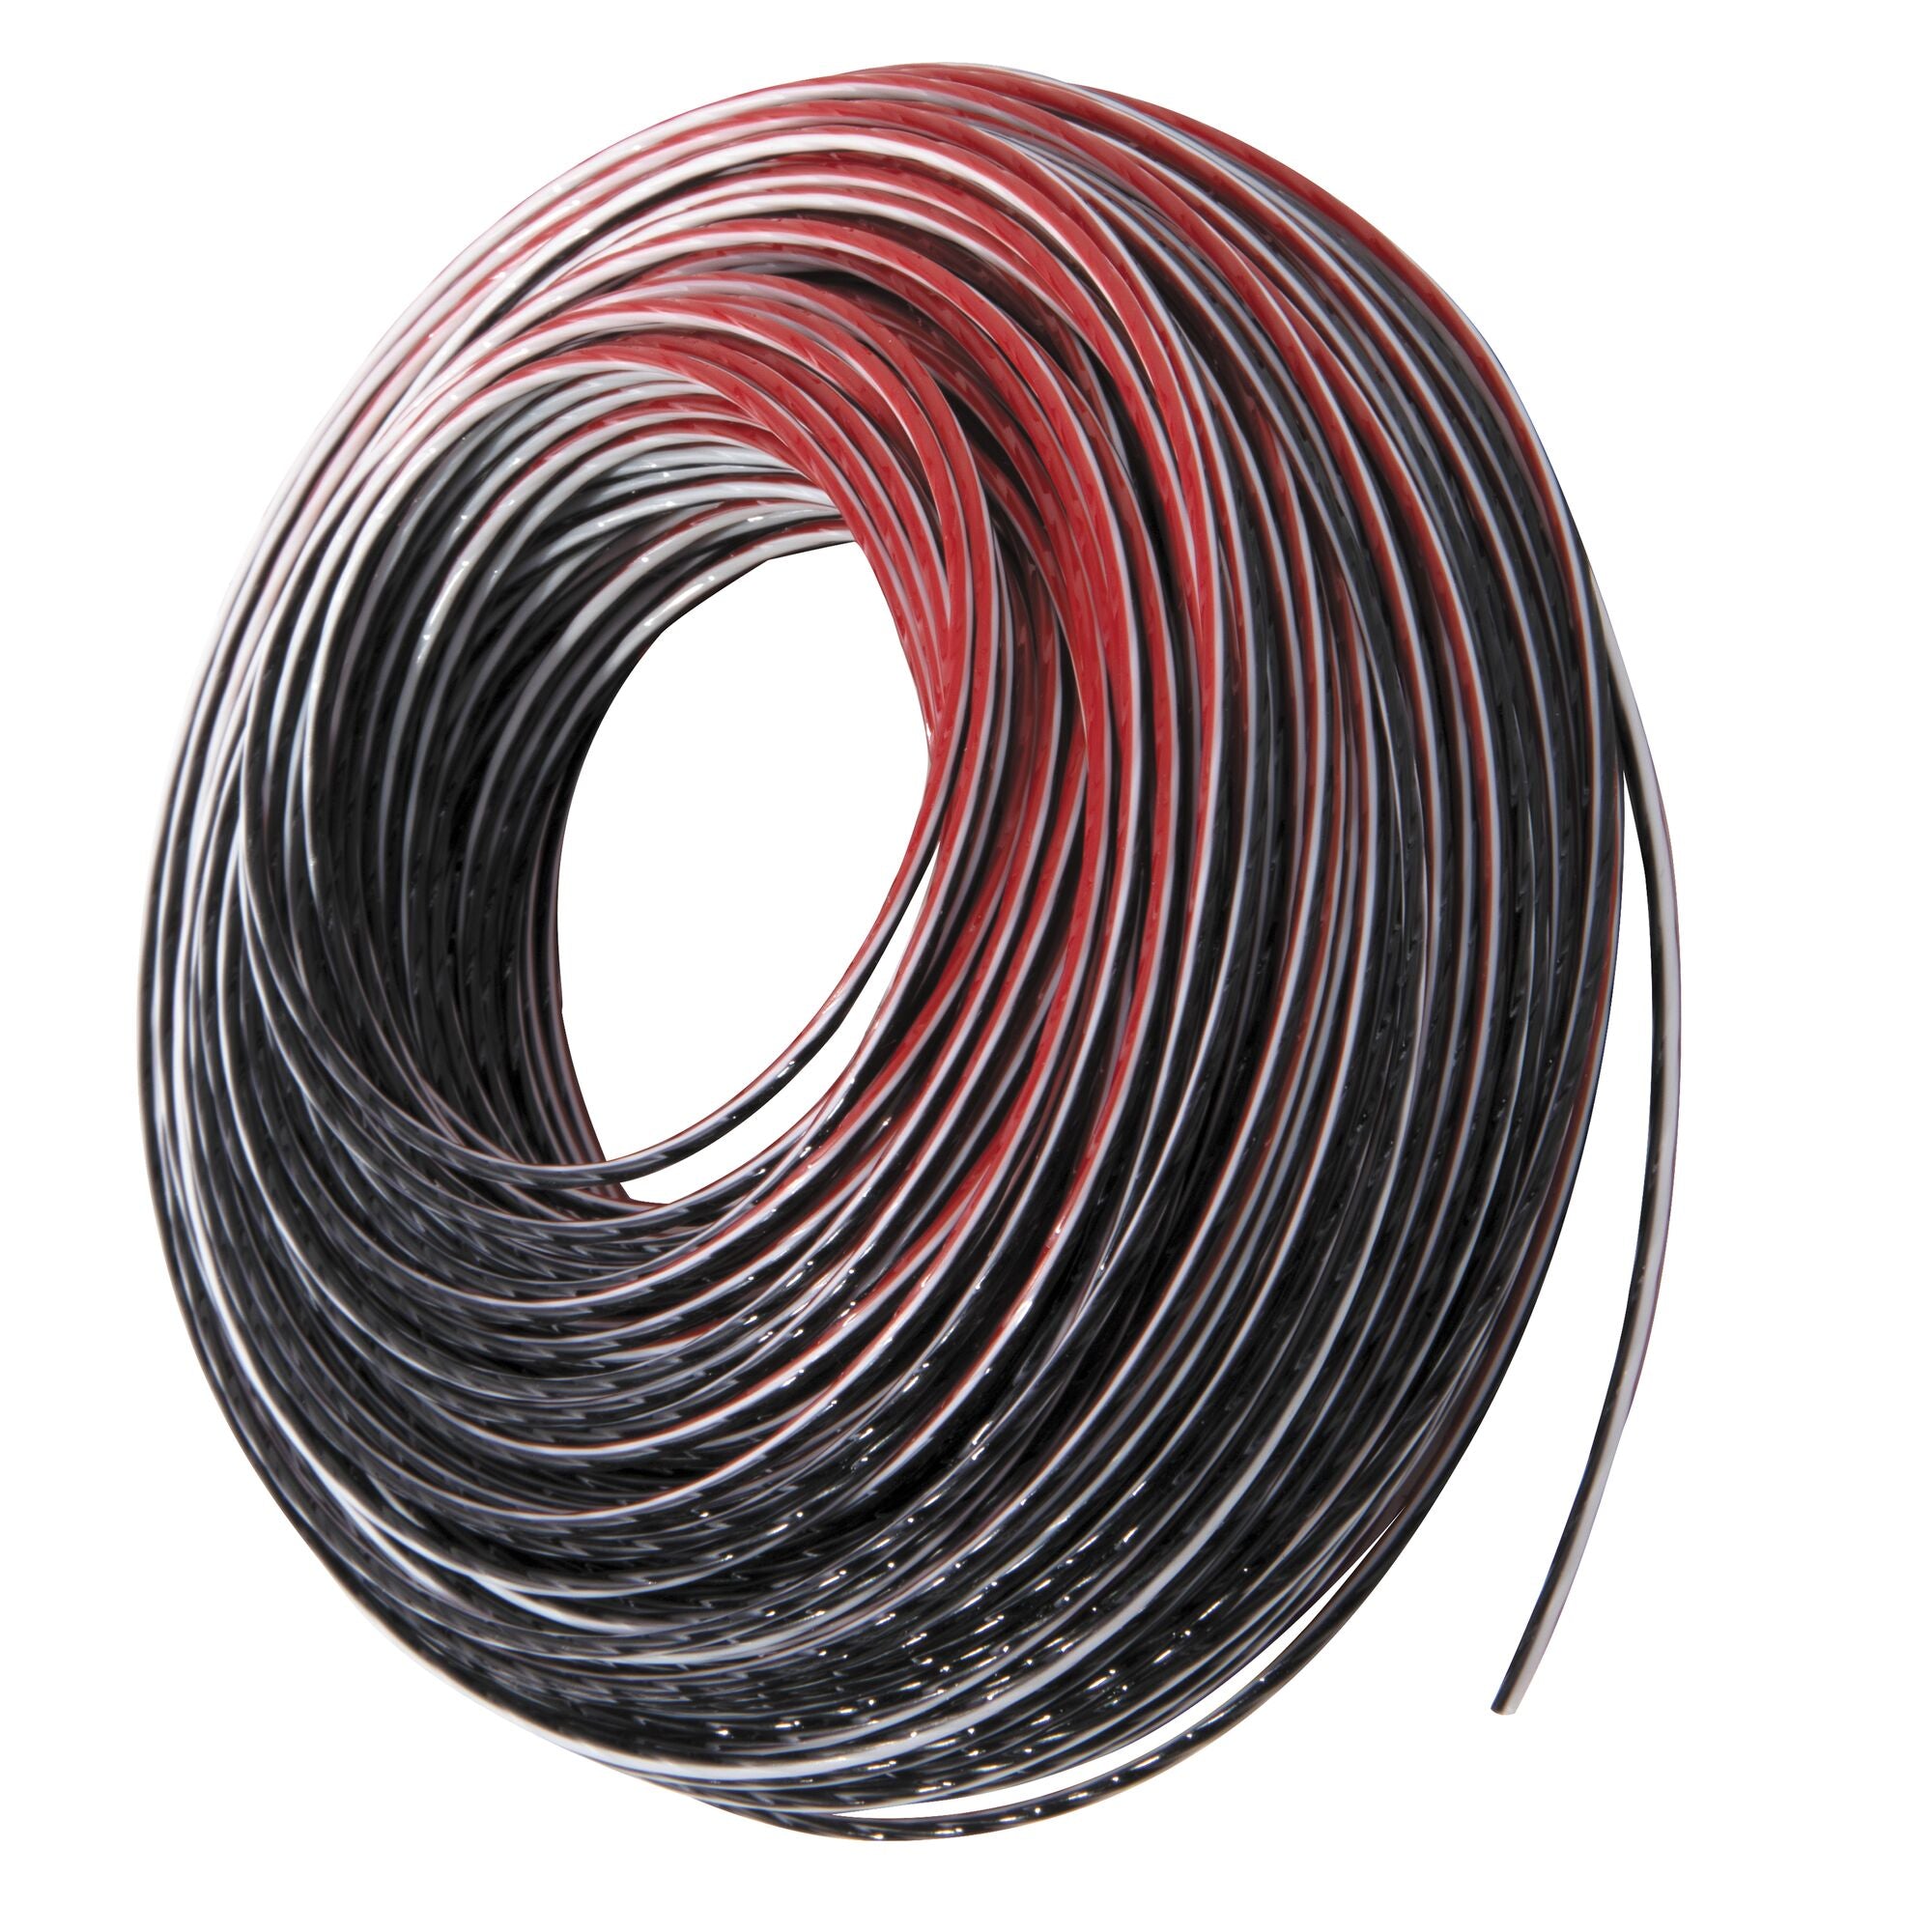 40 Foot Ninety five thousandths inch Trimmer Line in plastic packaging.